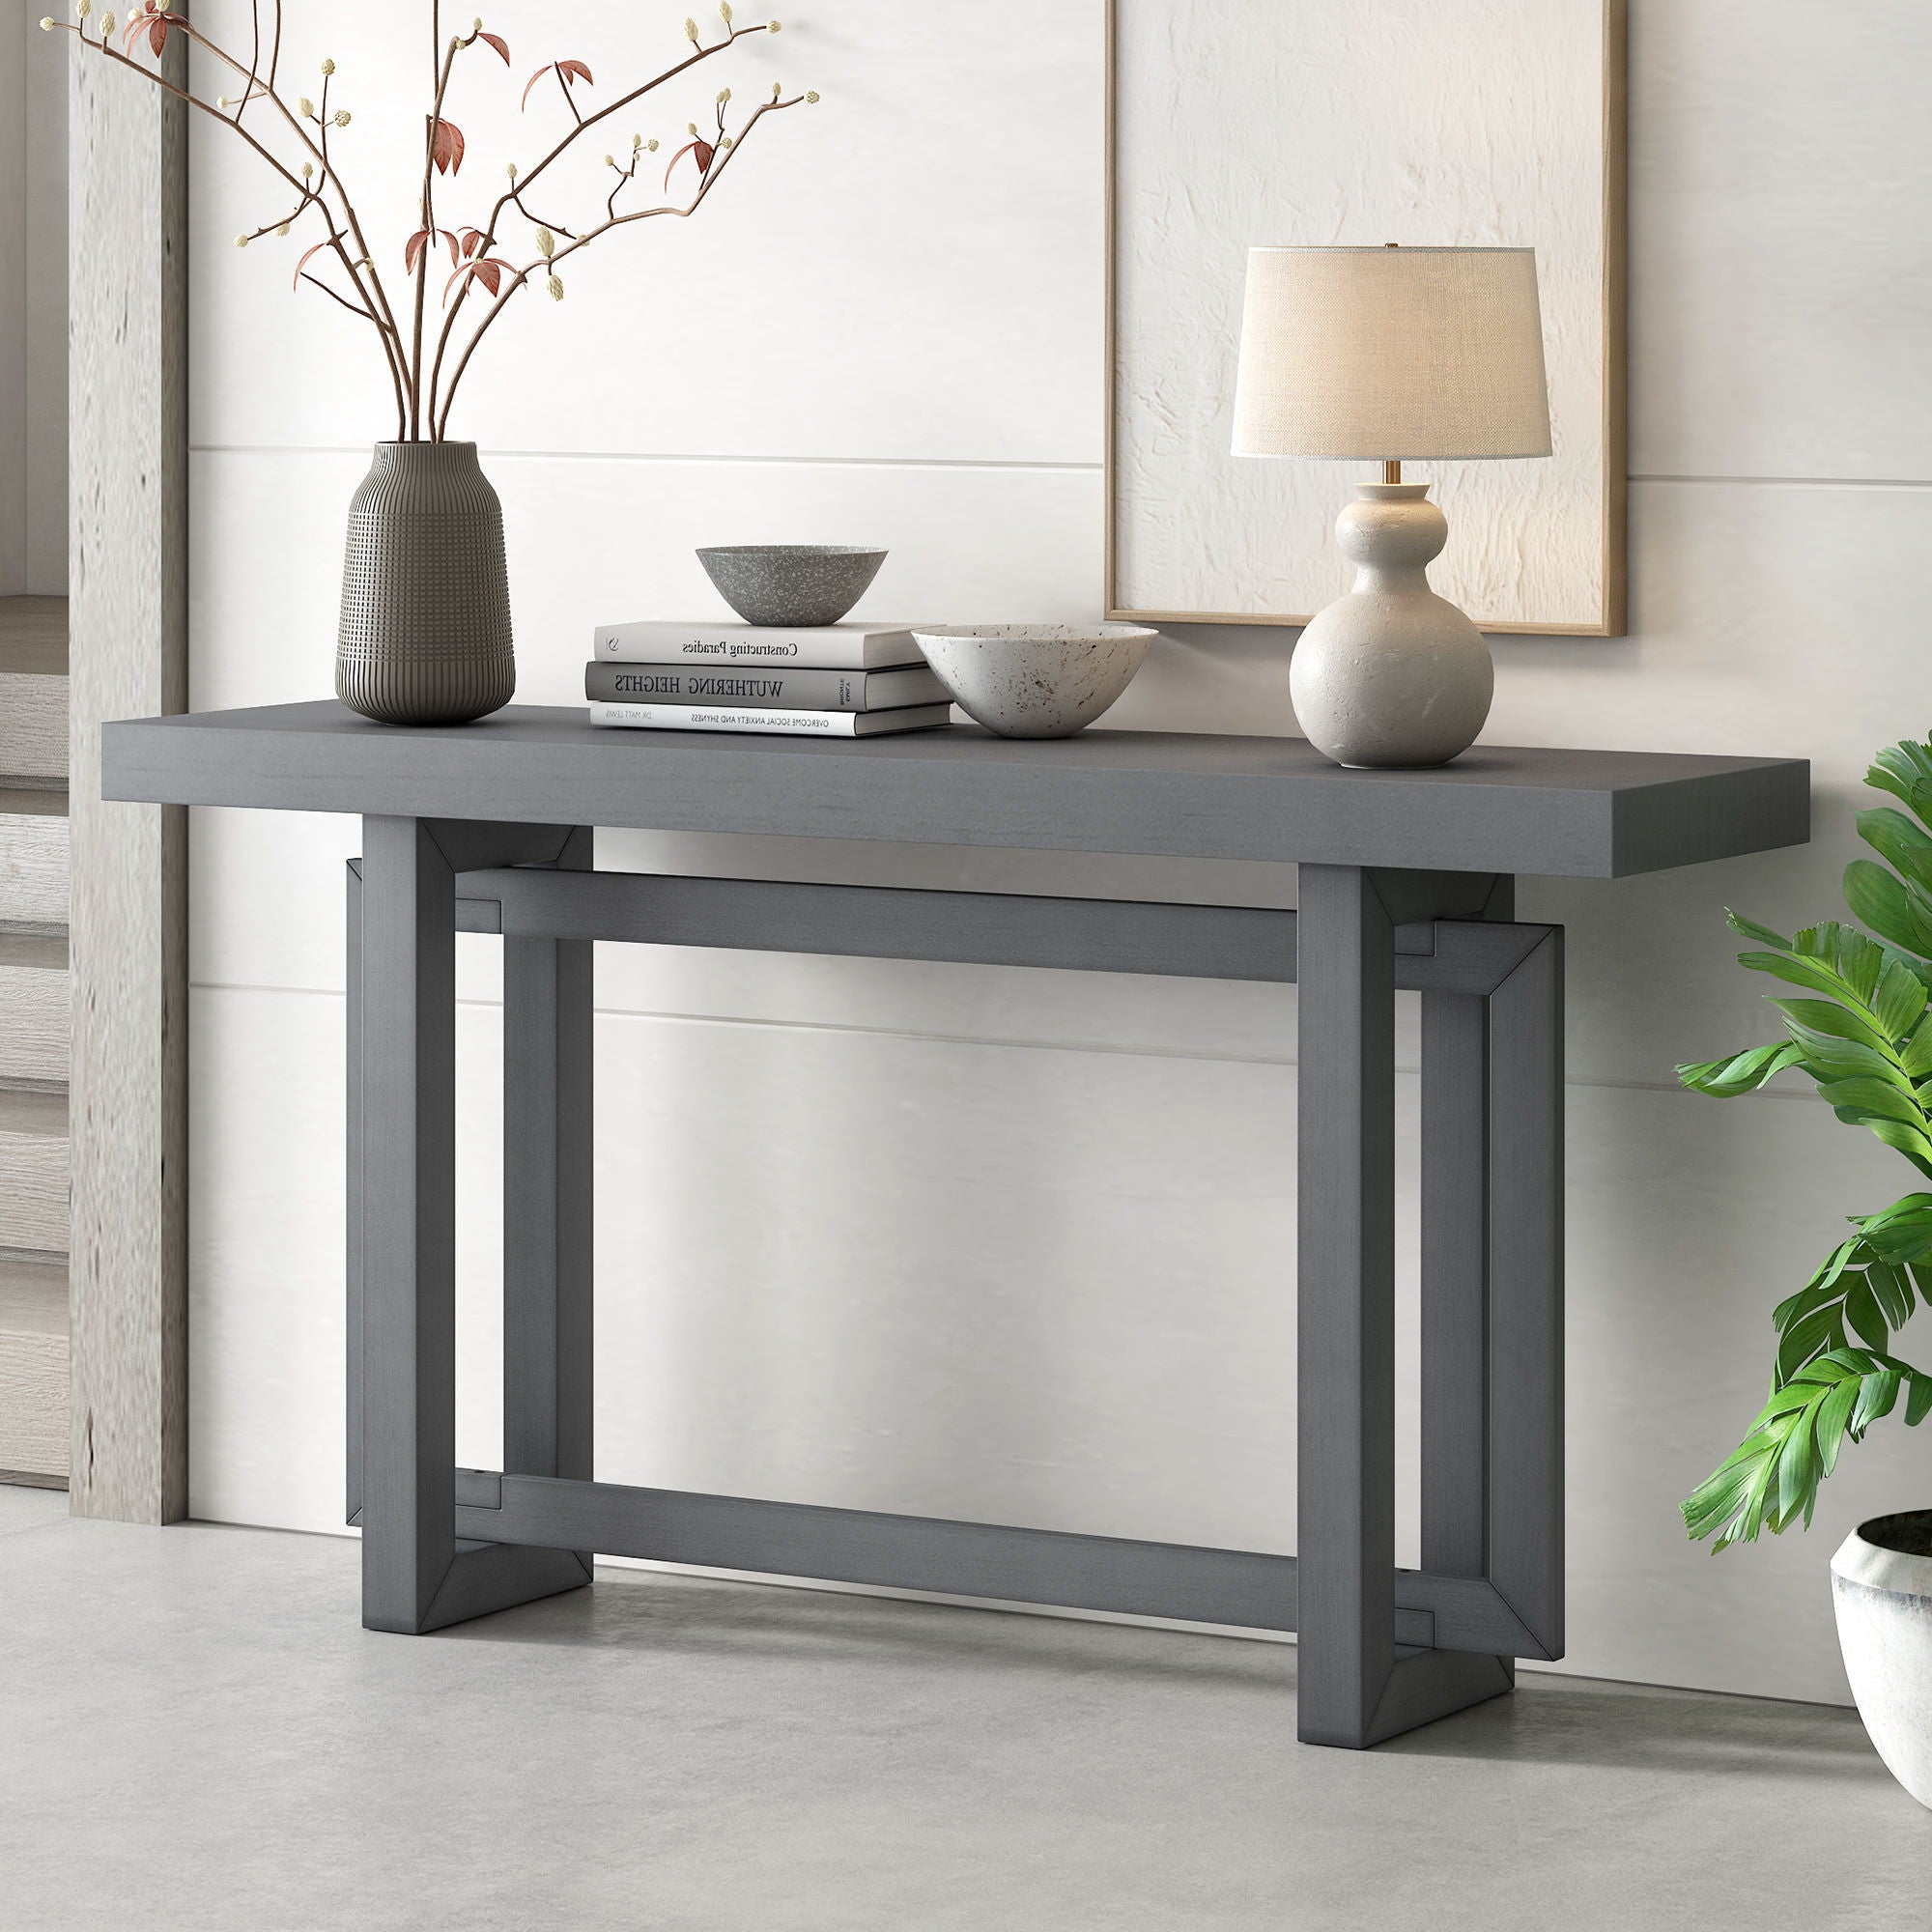 U_Style - Contemporary Console Table With Industrial - Inspired Concrete Wood Top, Extra Long Entryway Table For Entryway, Hallway, Foyer, Corridor